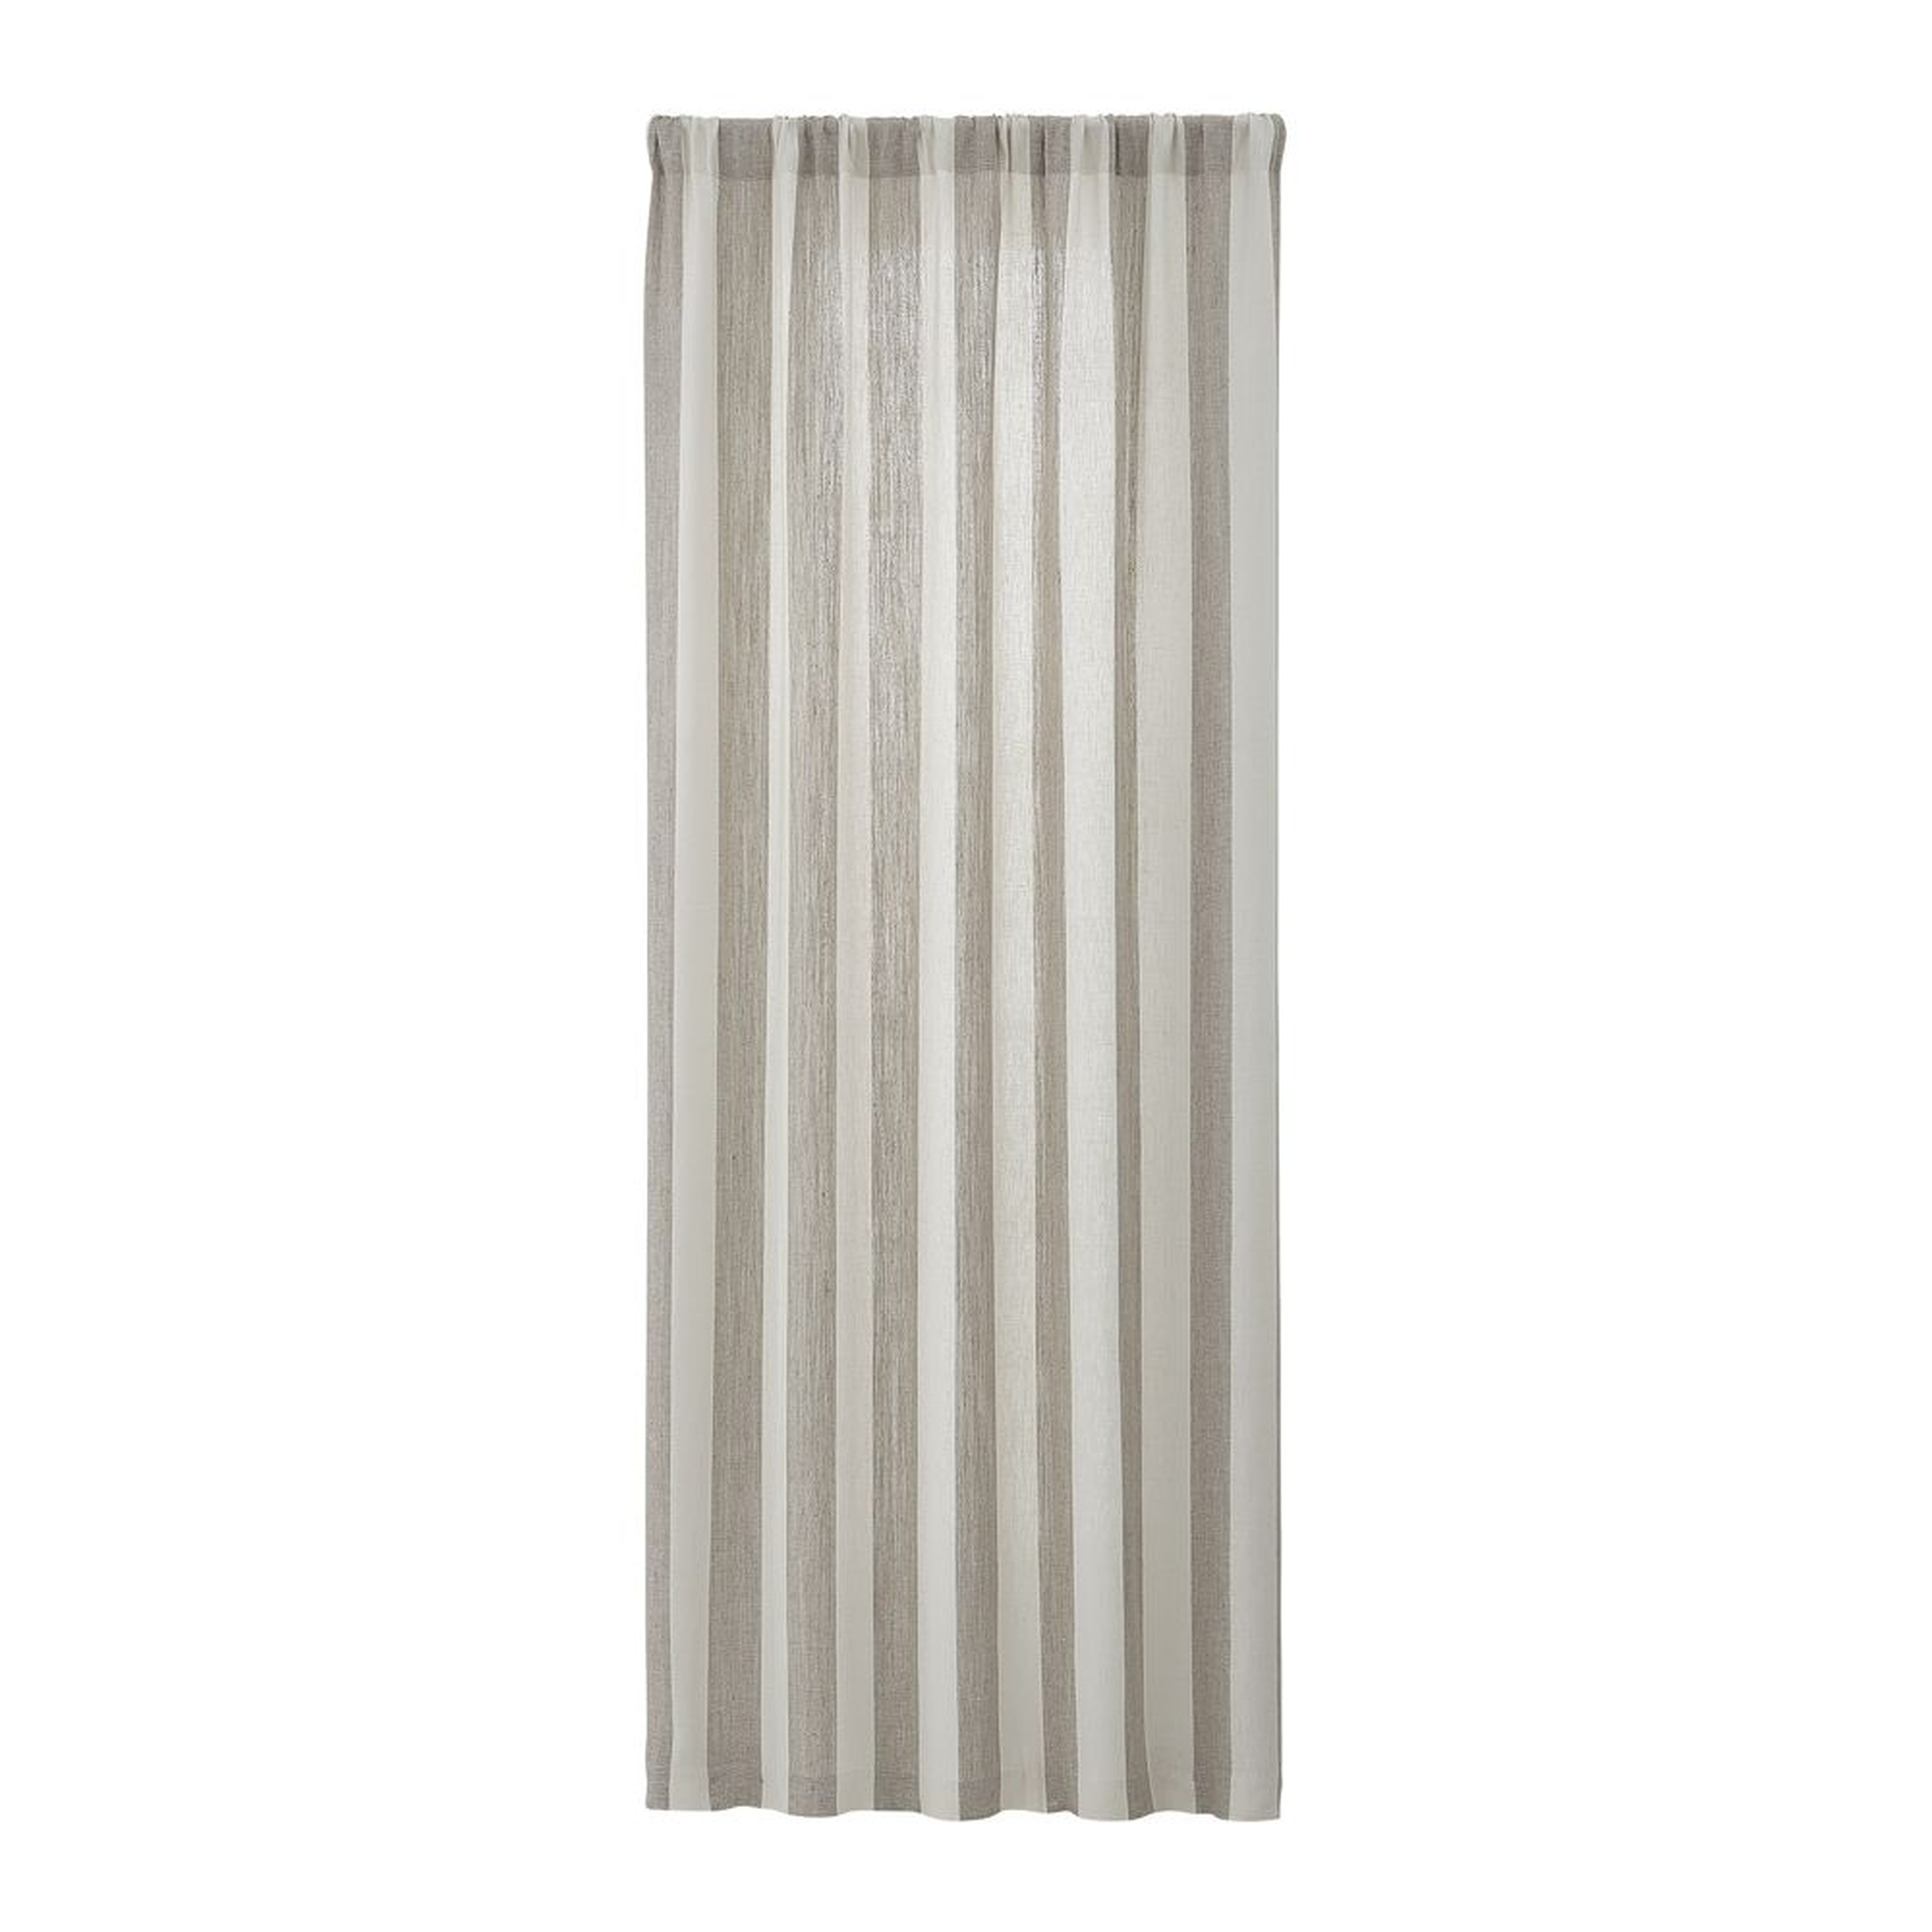 Willis Natural Taupe Curtain Panel 48x96 - Crate and Barrel